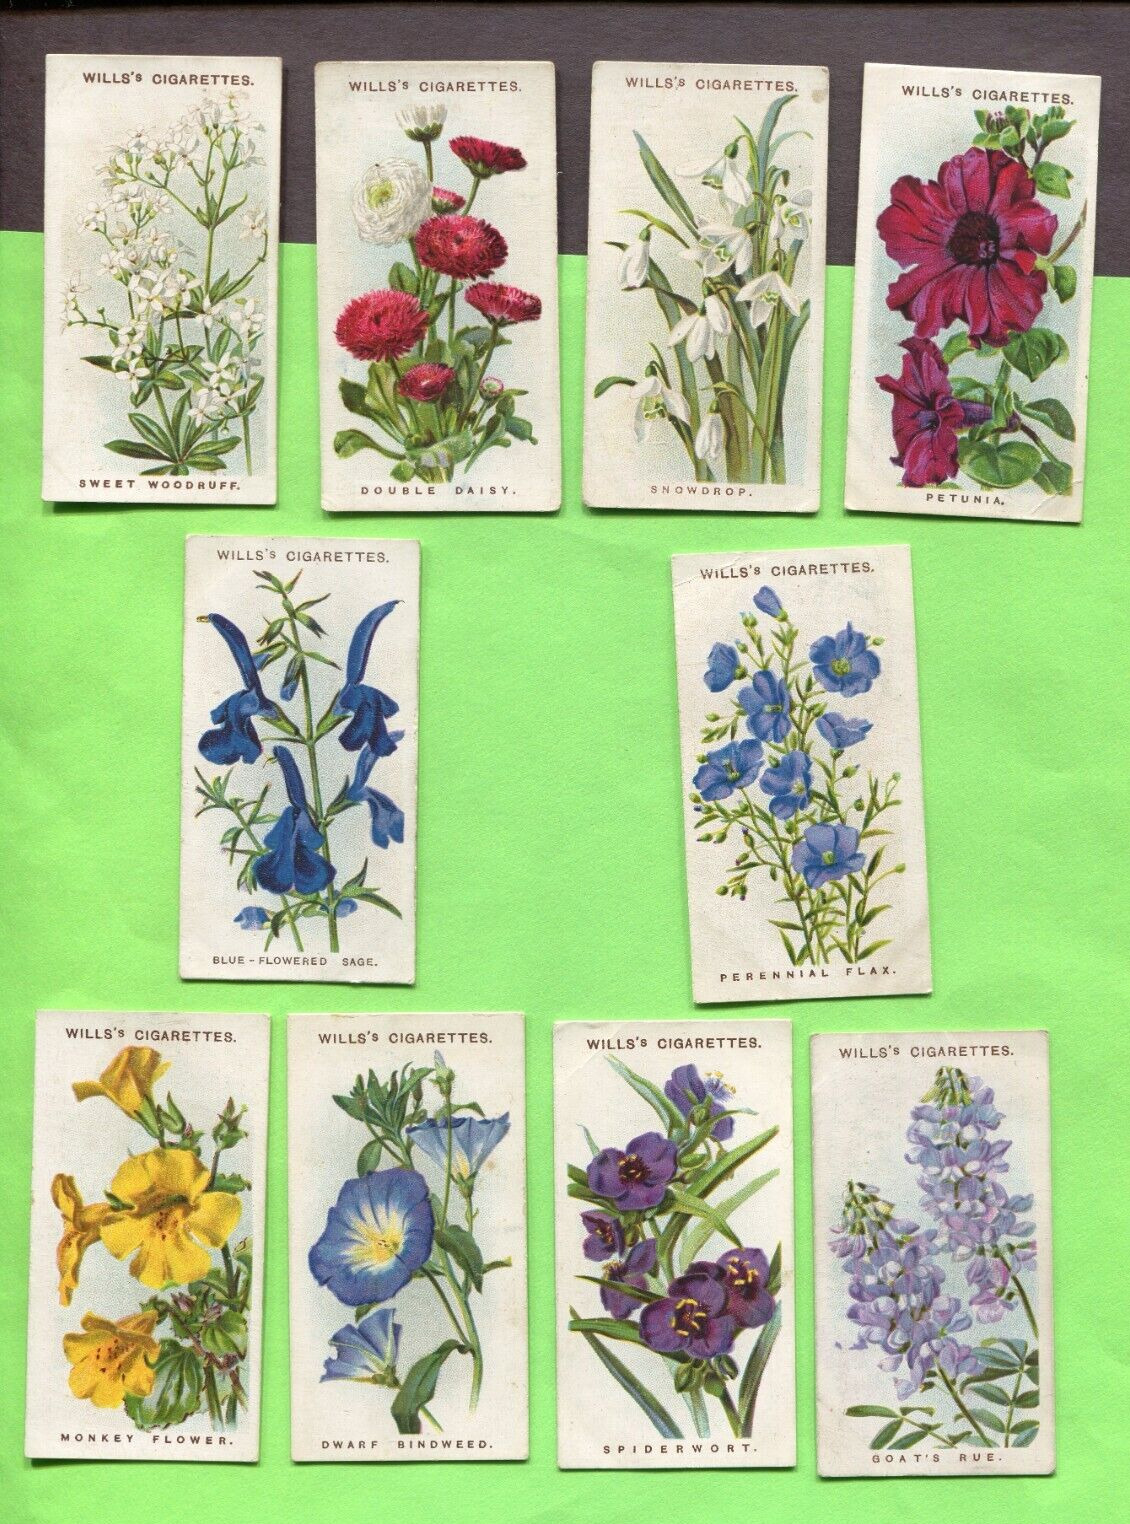 1913 W.D. & H.O. WILLS CIGARETTES OLD ENGLISH GARDEN FLOWER 2ND 10 TOBACCO CARDS